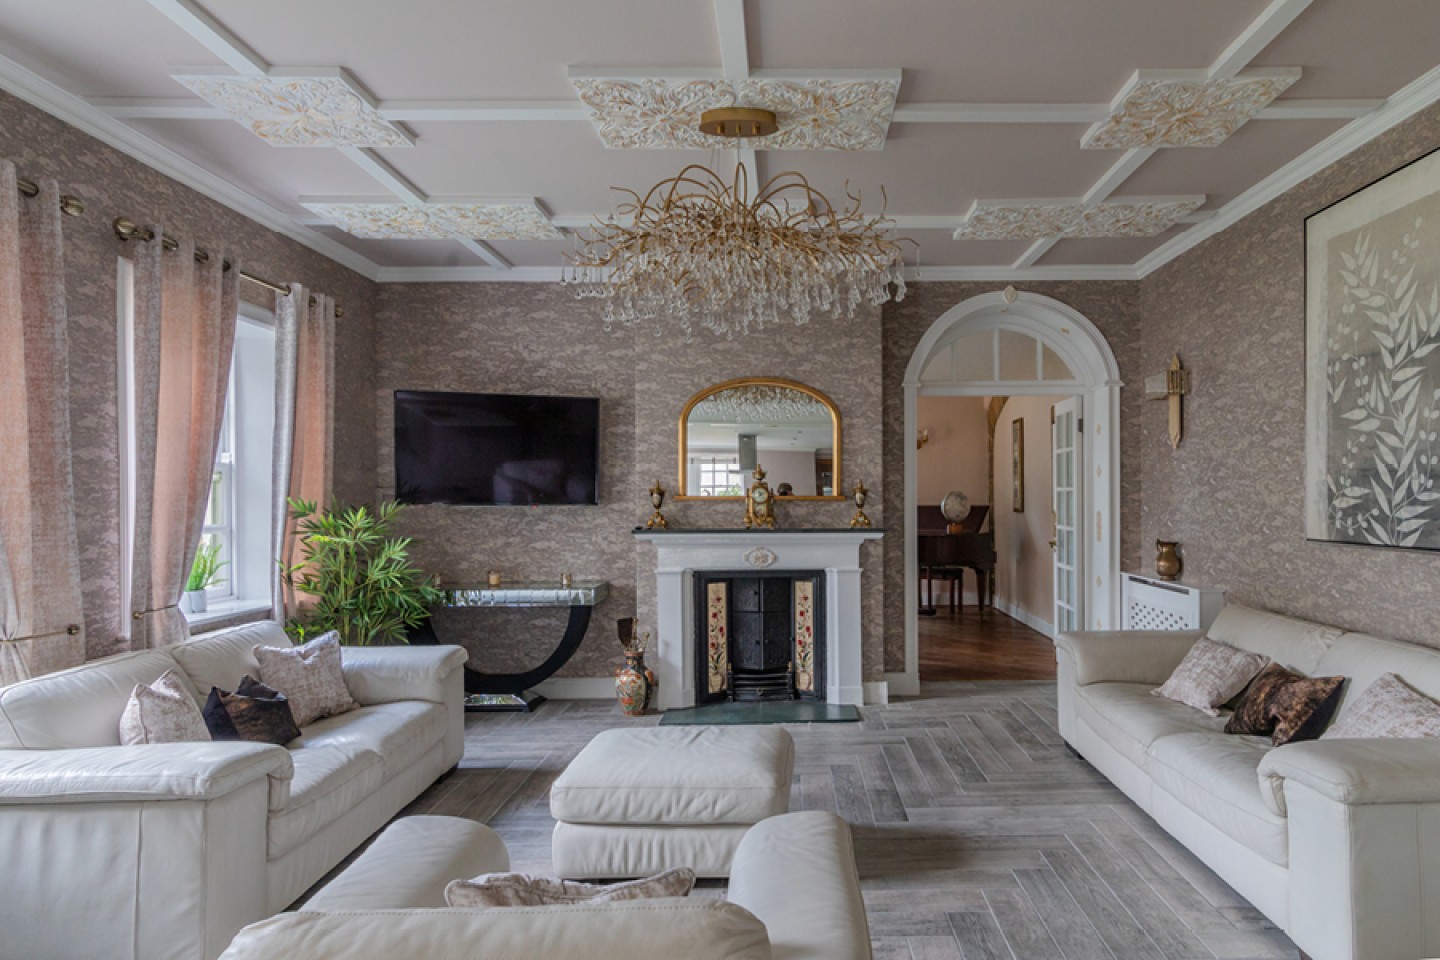 Large open lounge with details ceilings and glass chandelier